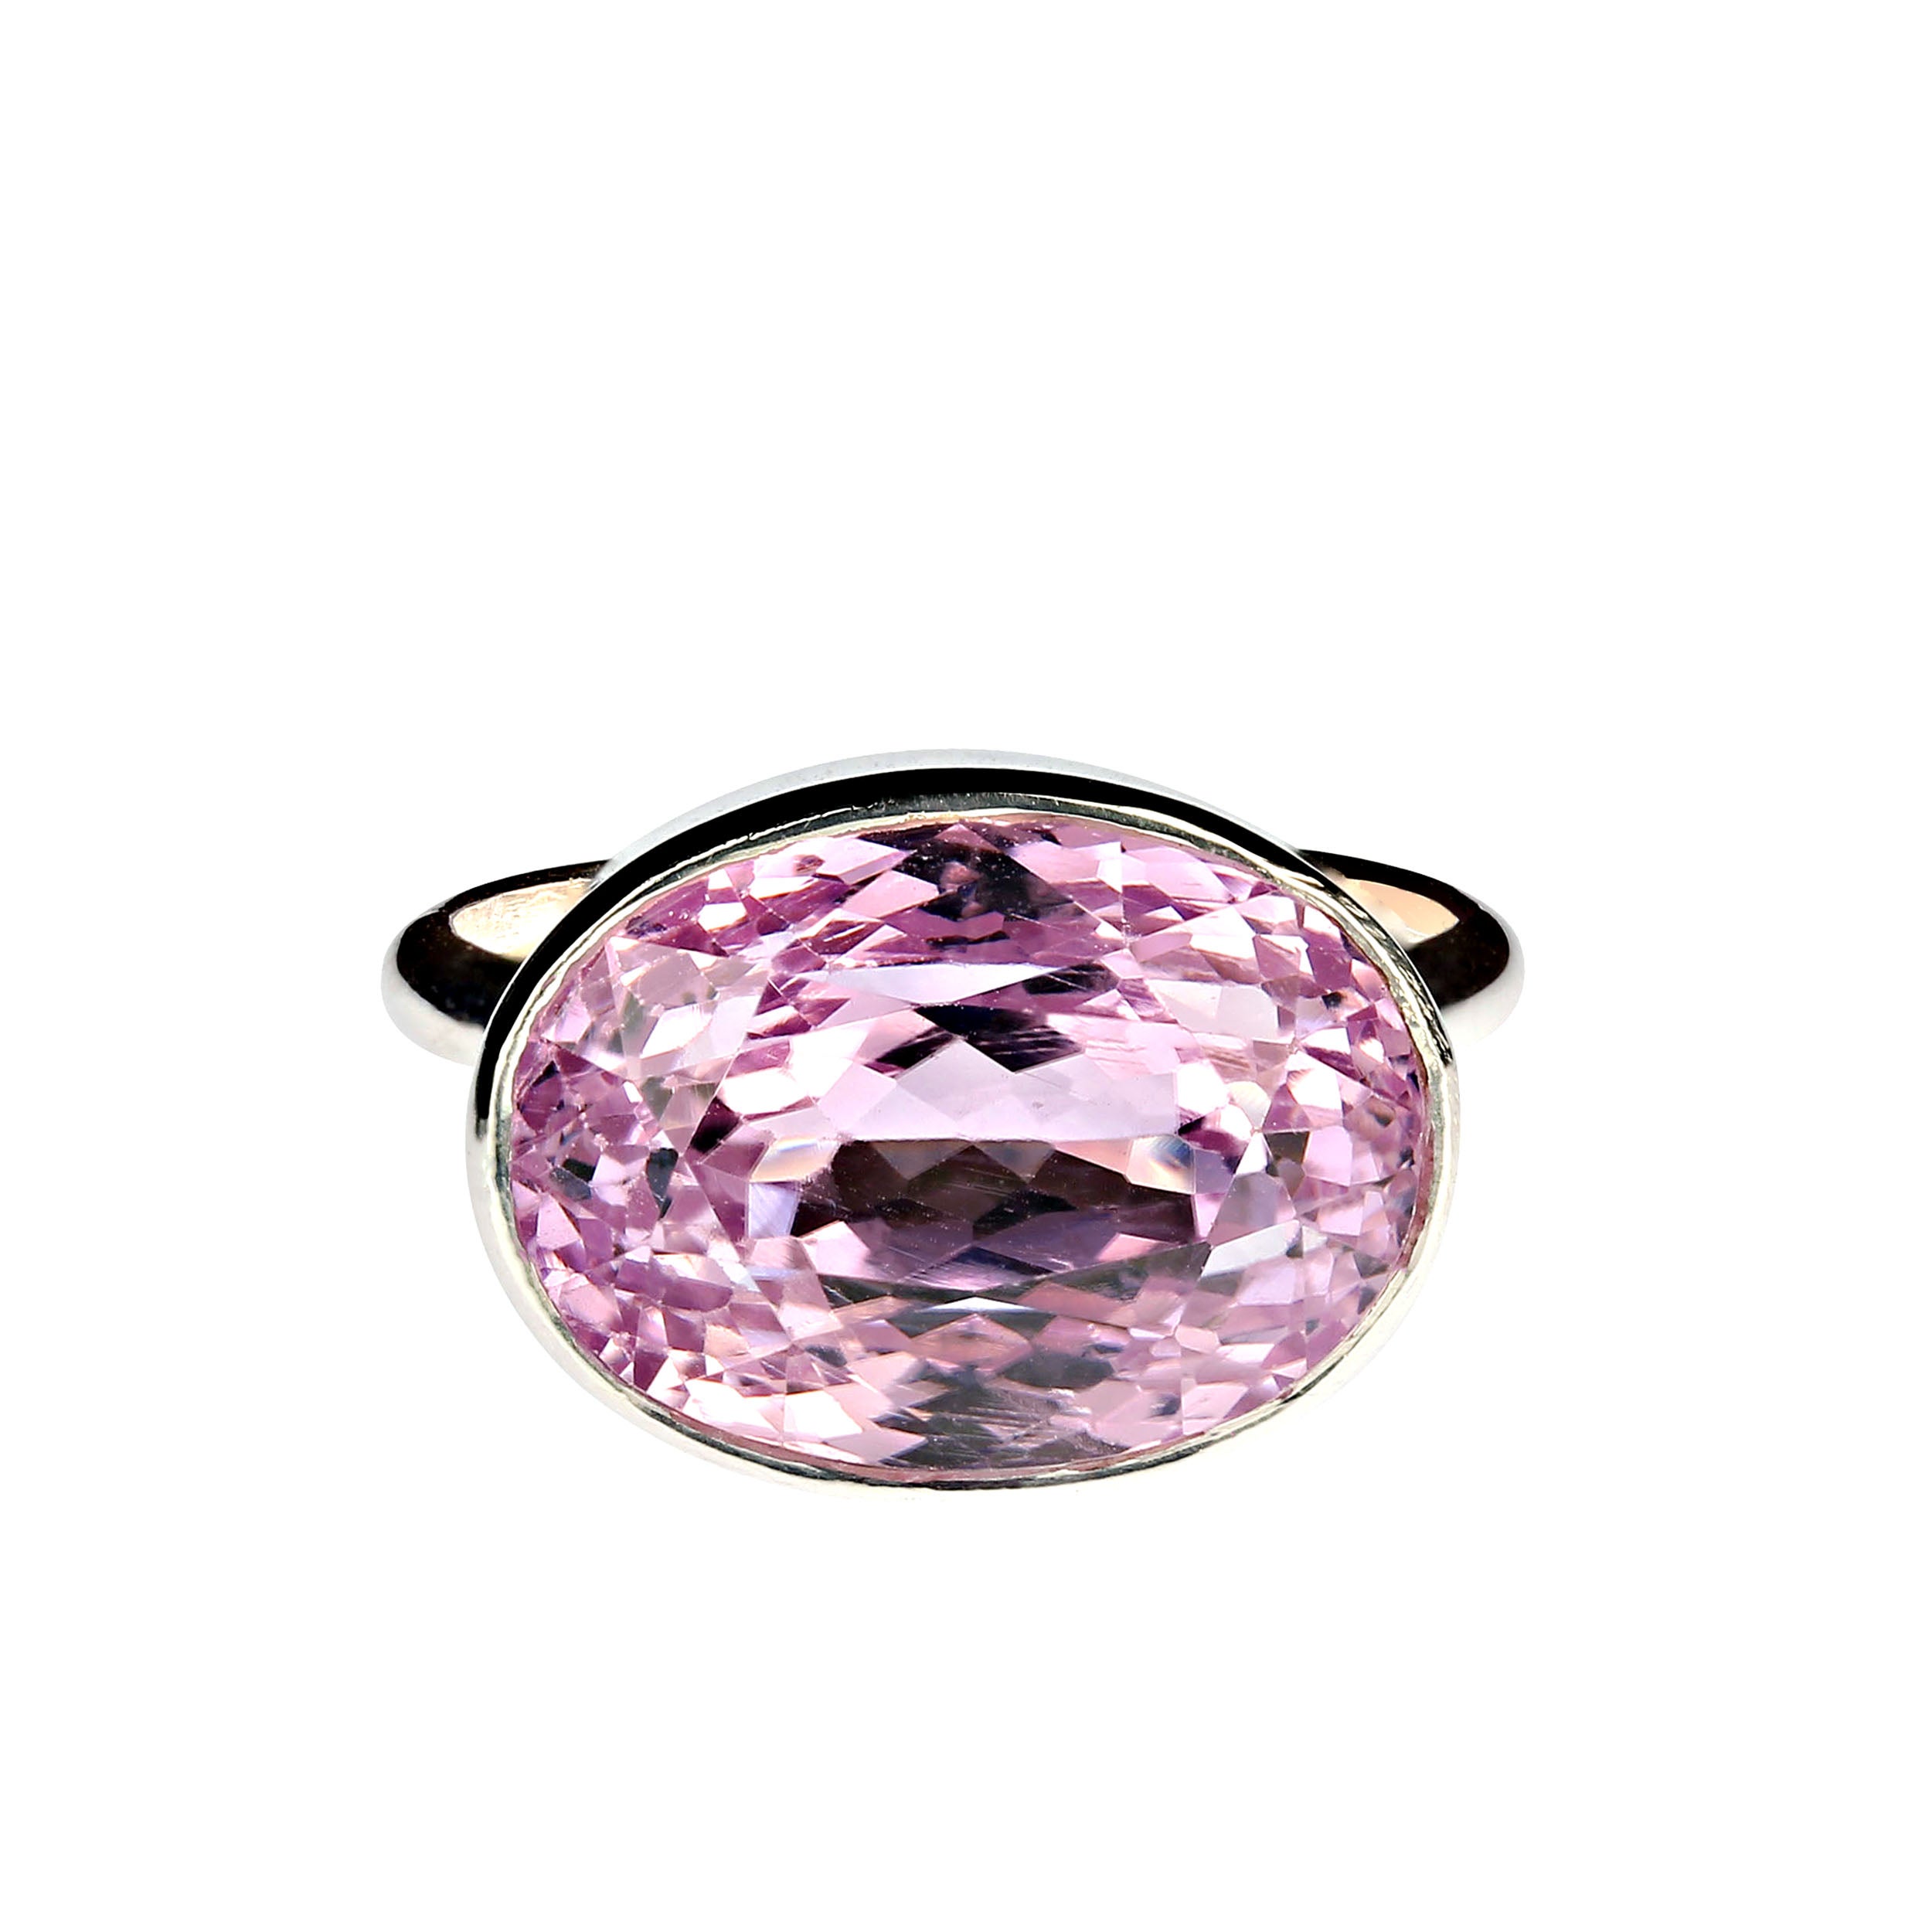 Elegant glowing sterling silver bezel setting create the perfect presentation for the precious pink 15.50ct kunzite. The east-west setting is just one more aspect of the unique ring that makes it a 'must have' in your jewelry wardrobe. No changes by